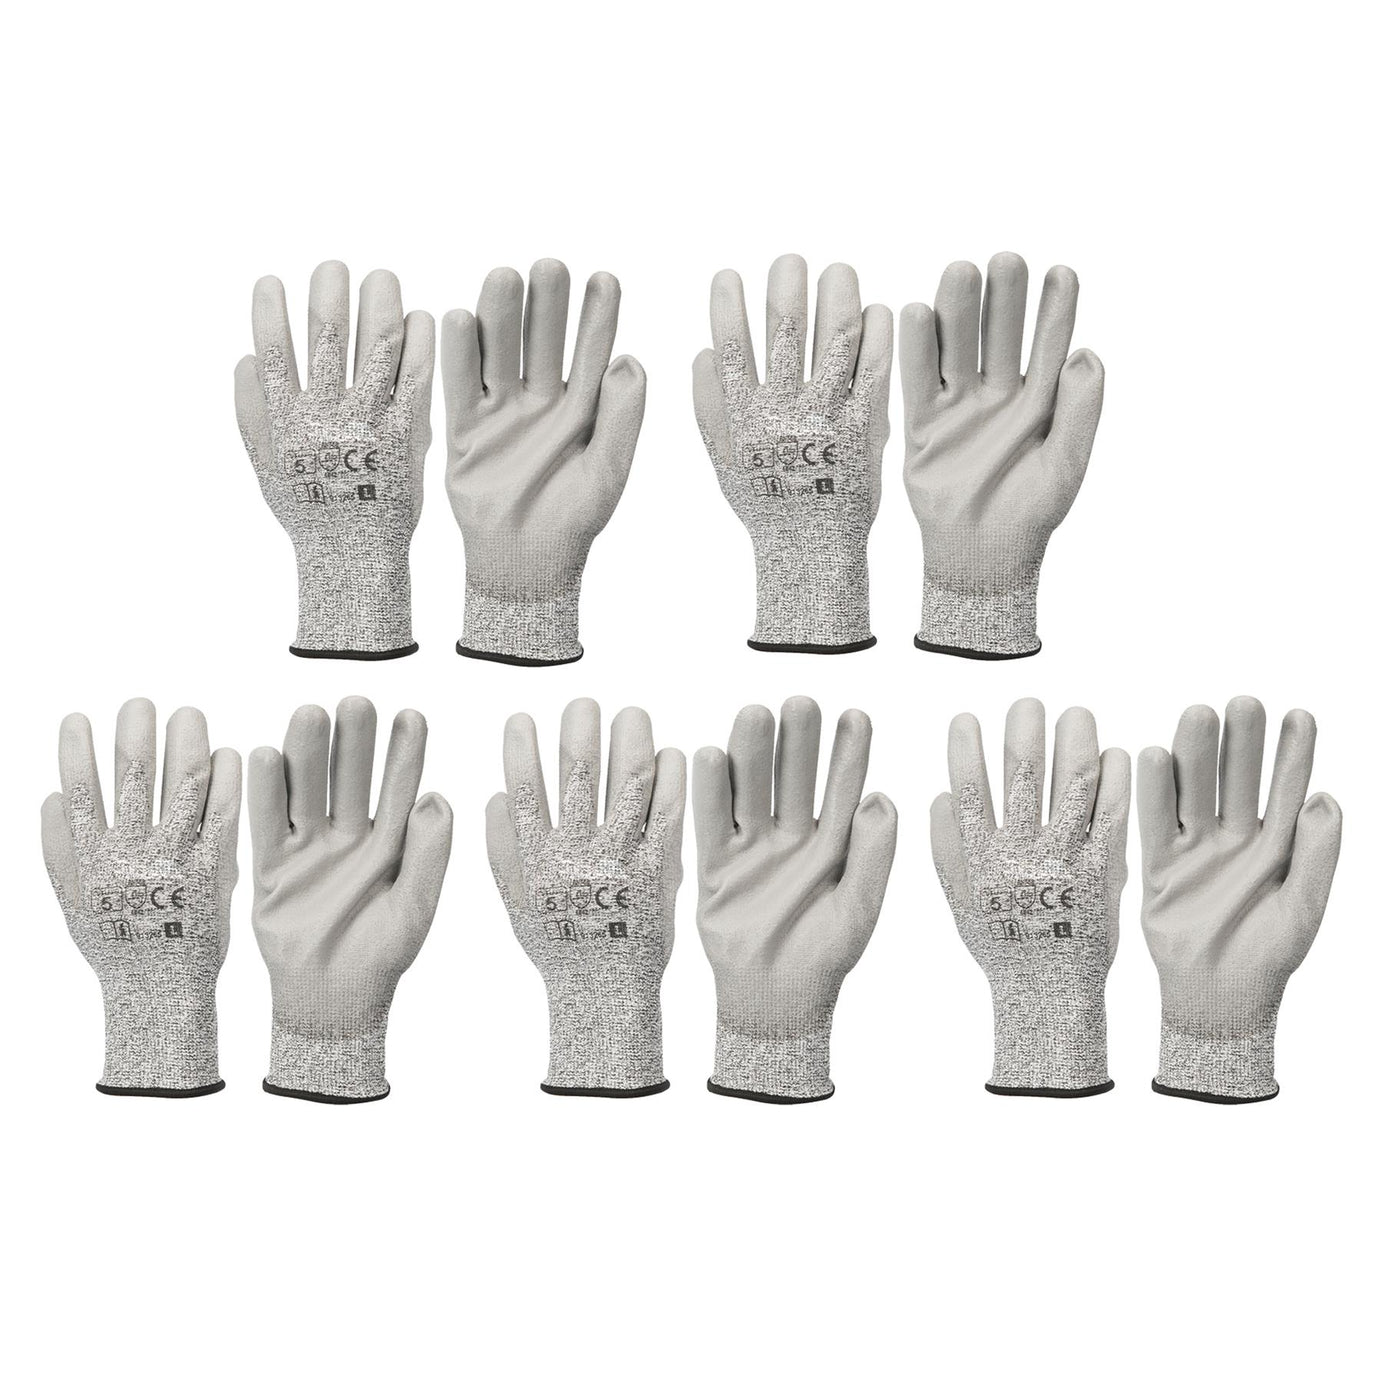 PU Palm Coated Work Gloves Garden Garage Cut Protection Very Strong Durable[Cut 5,20,DP01895]